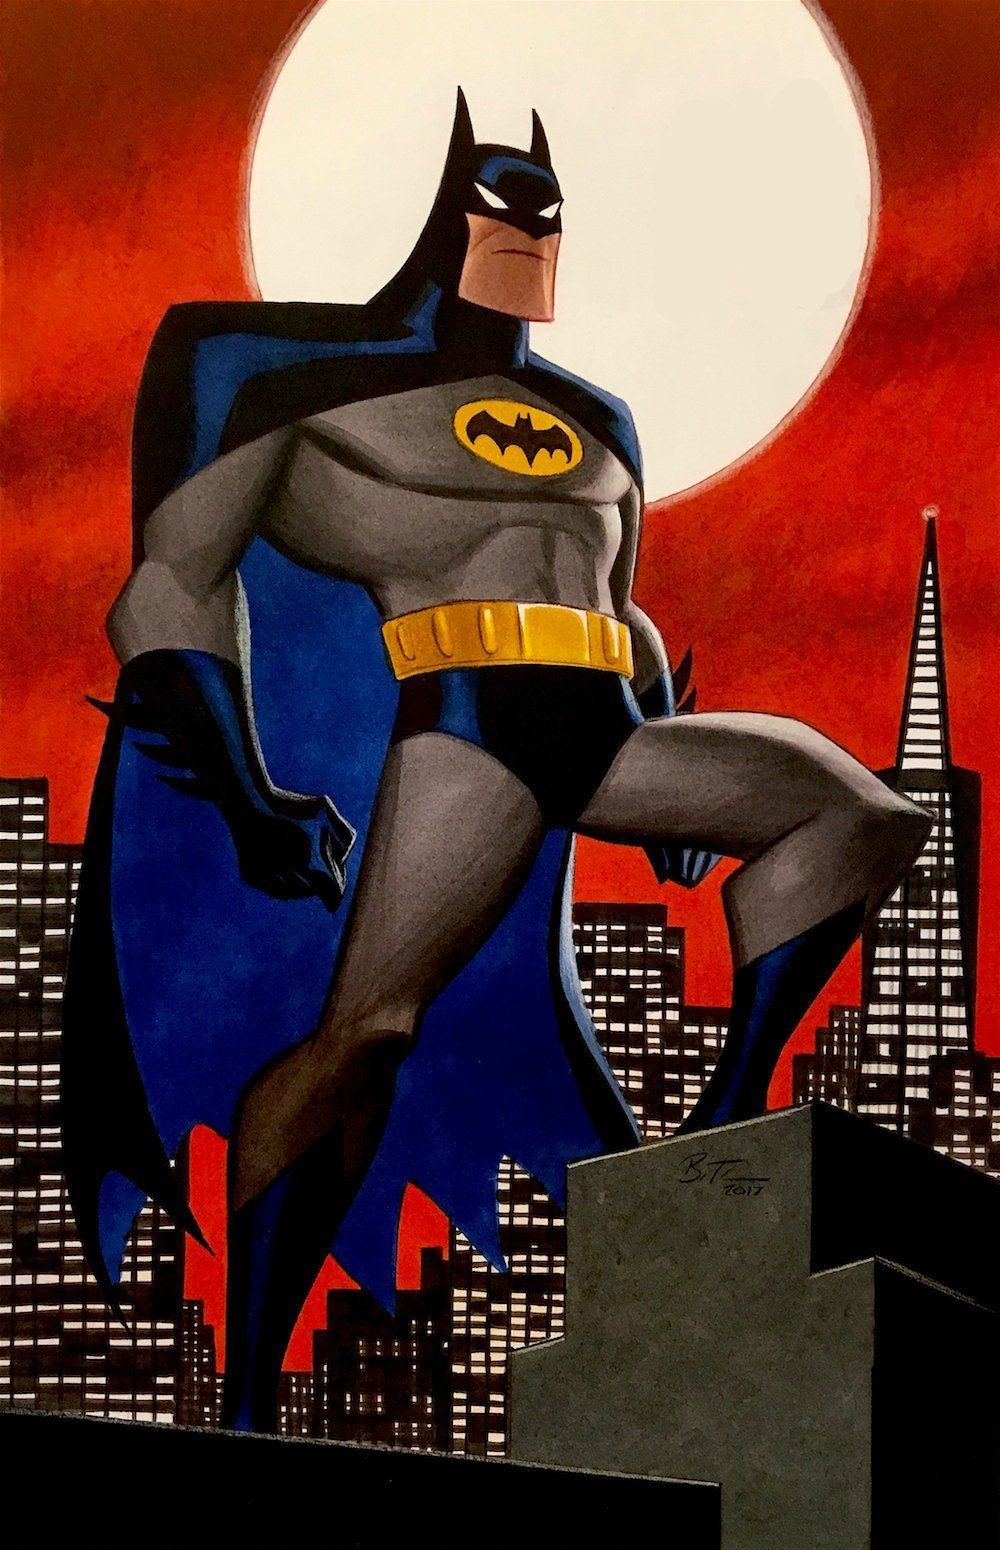 Batman: The Animated Series Art by Bruce Timm